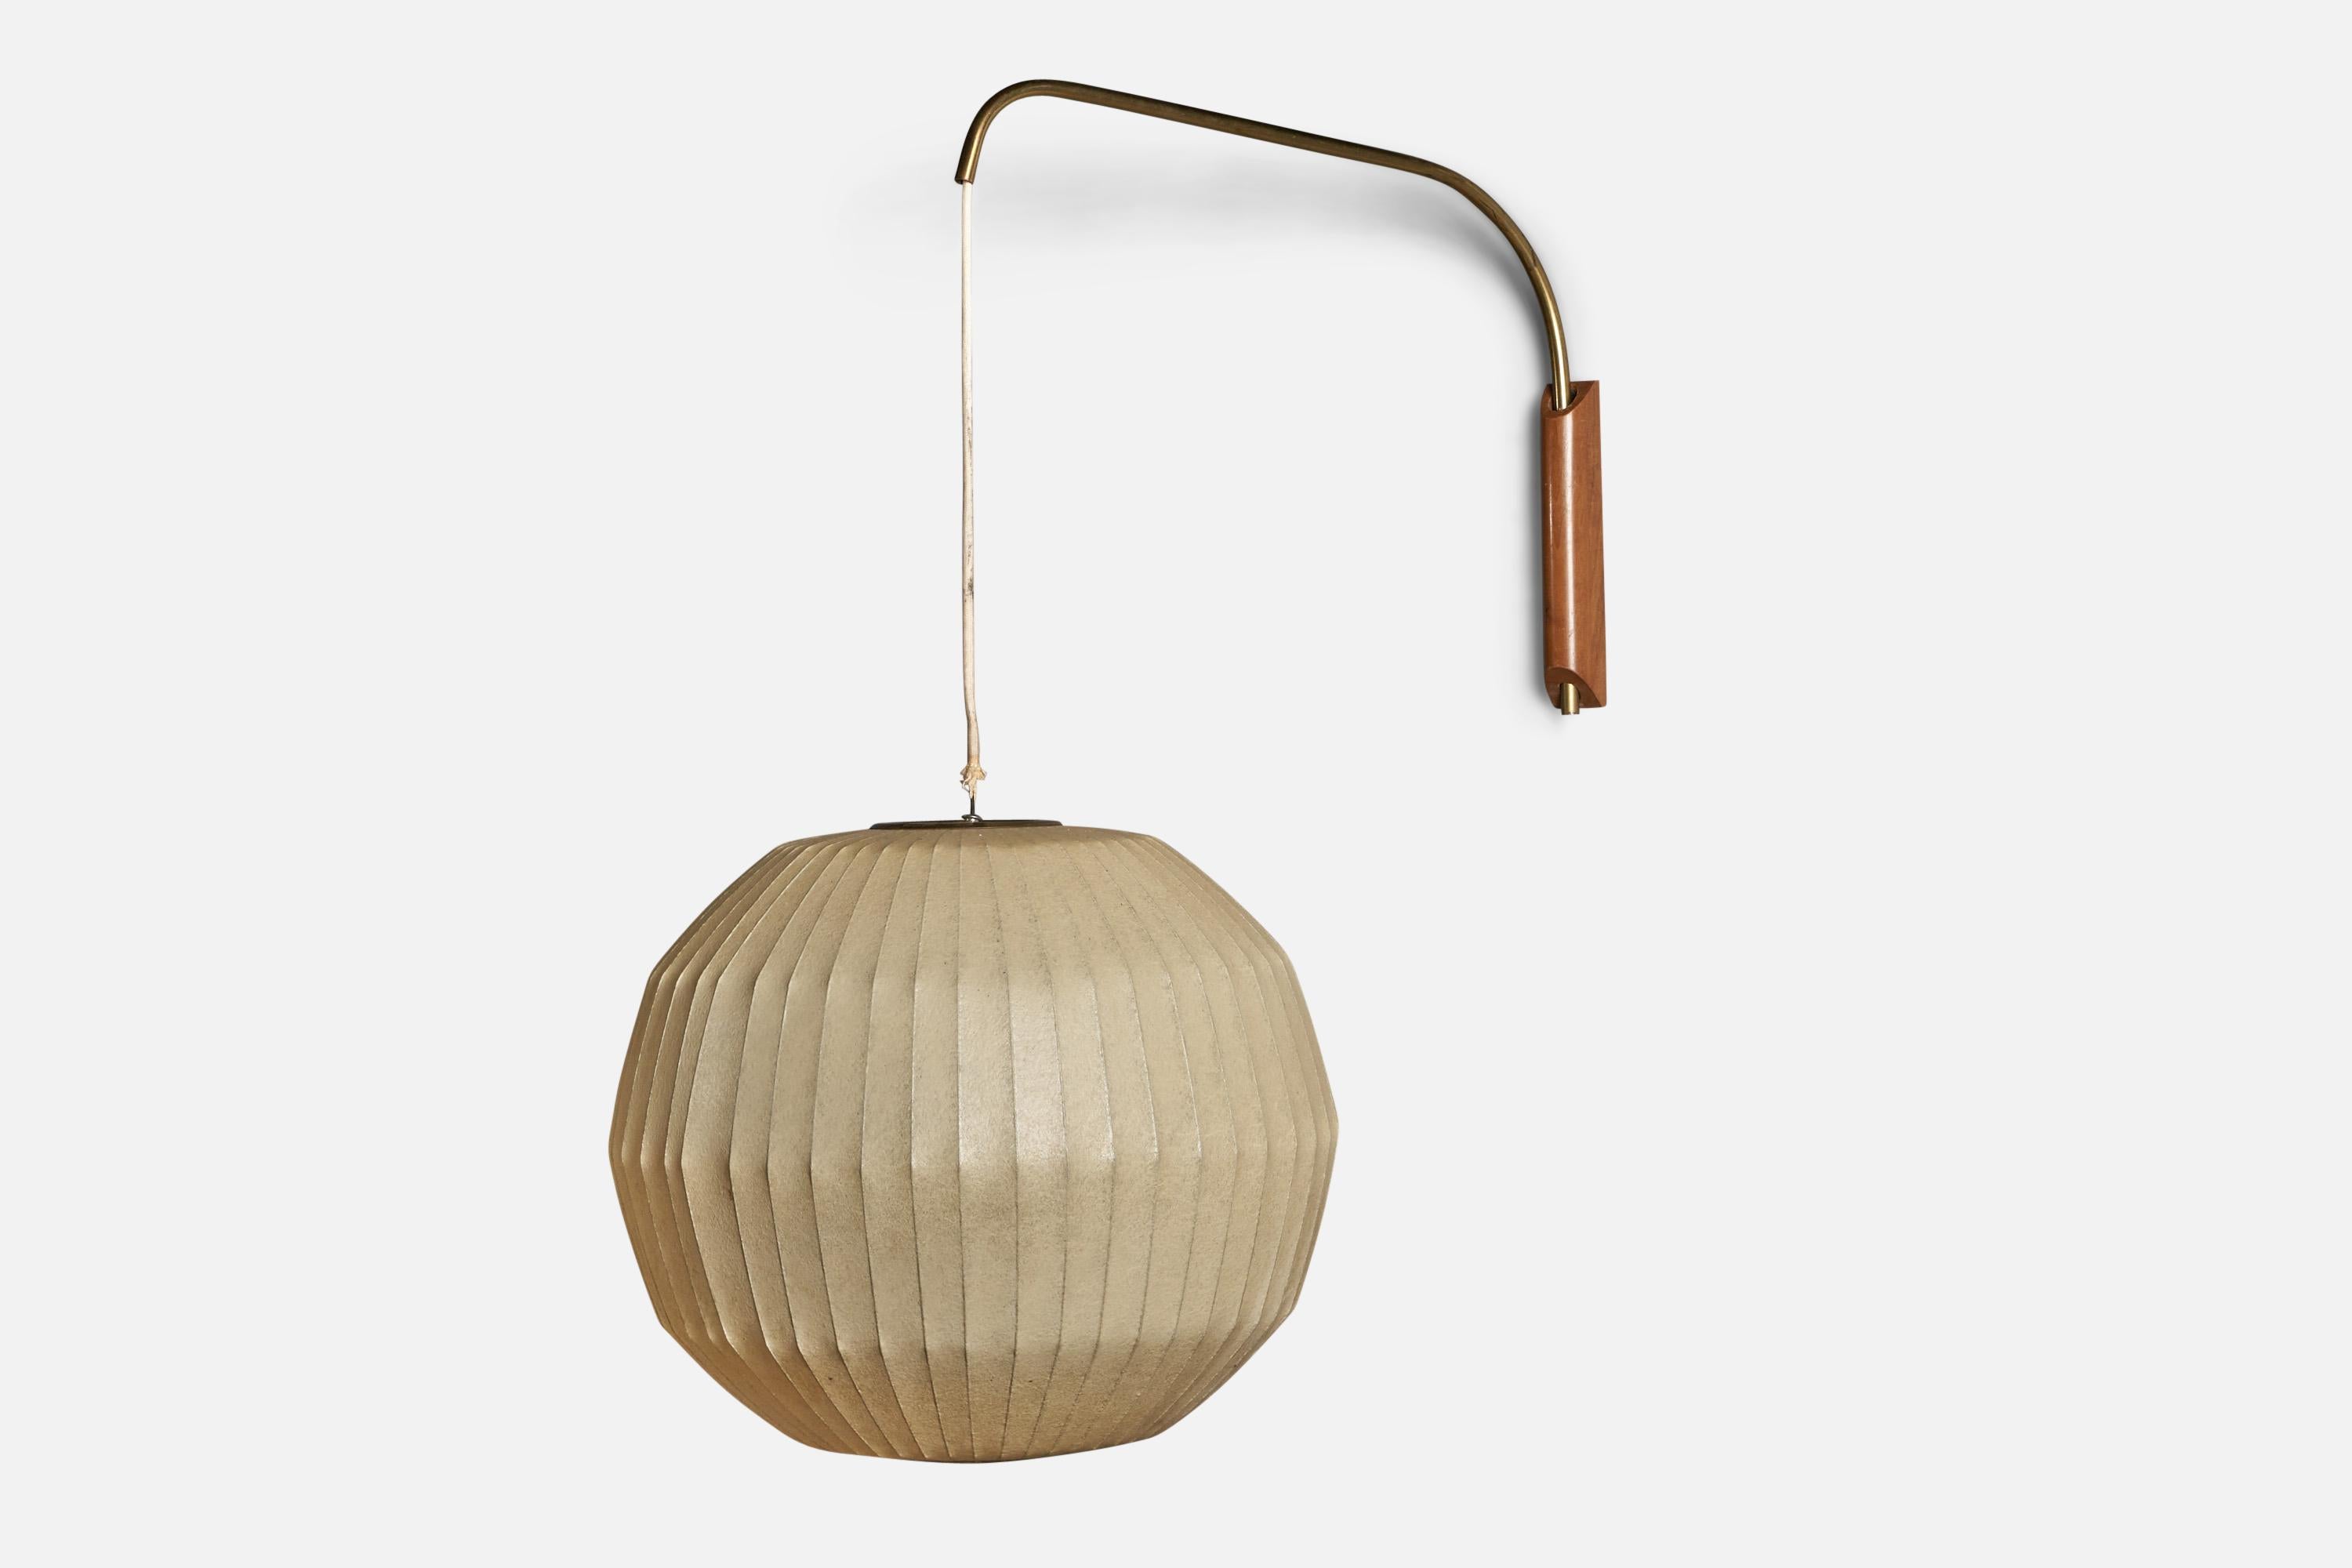 A sizeable brass, walnut and resin wall light, designed by George Nelson and produced by Herman Miller, USA, 1950s.

Please note cord feeds from bottom of stem and functions via plug-in.
Overall Dimensions (inches): 21.5